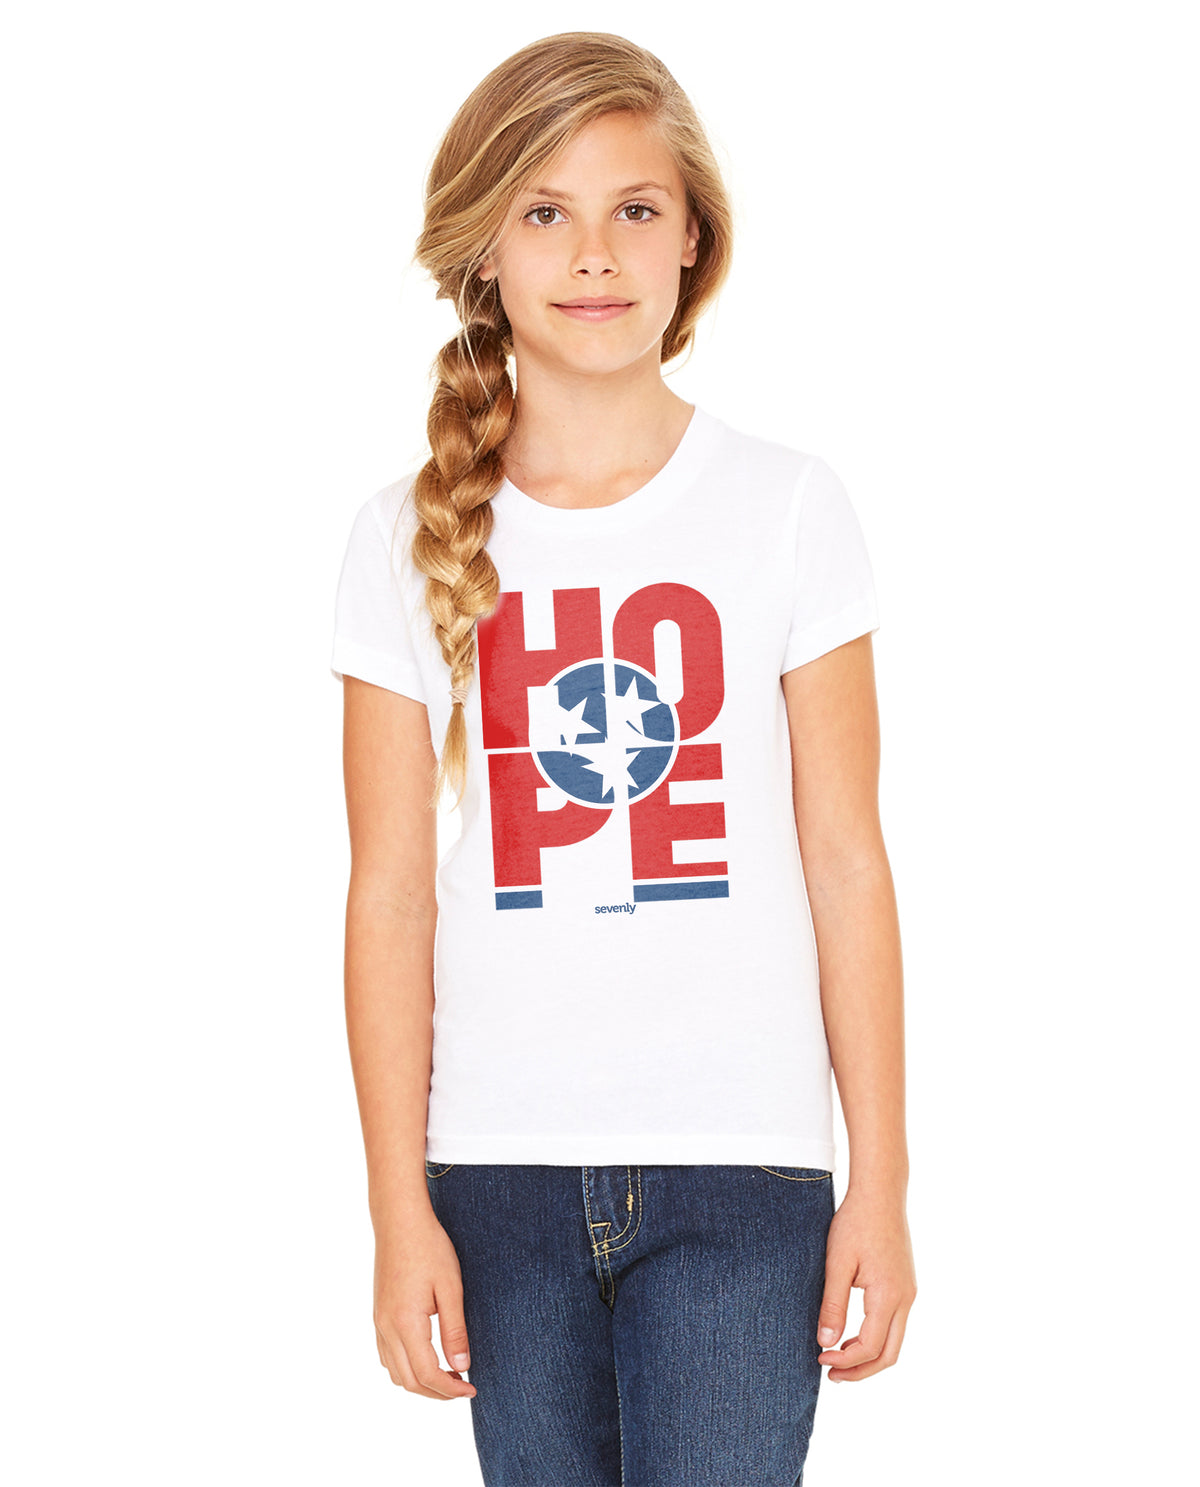 HOPE Tennessee Unisex Premium Crewneck Tee For The Family - Sevenly